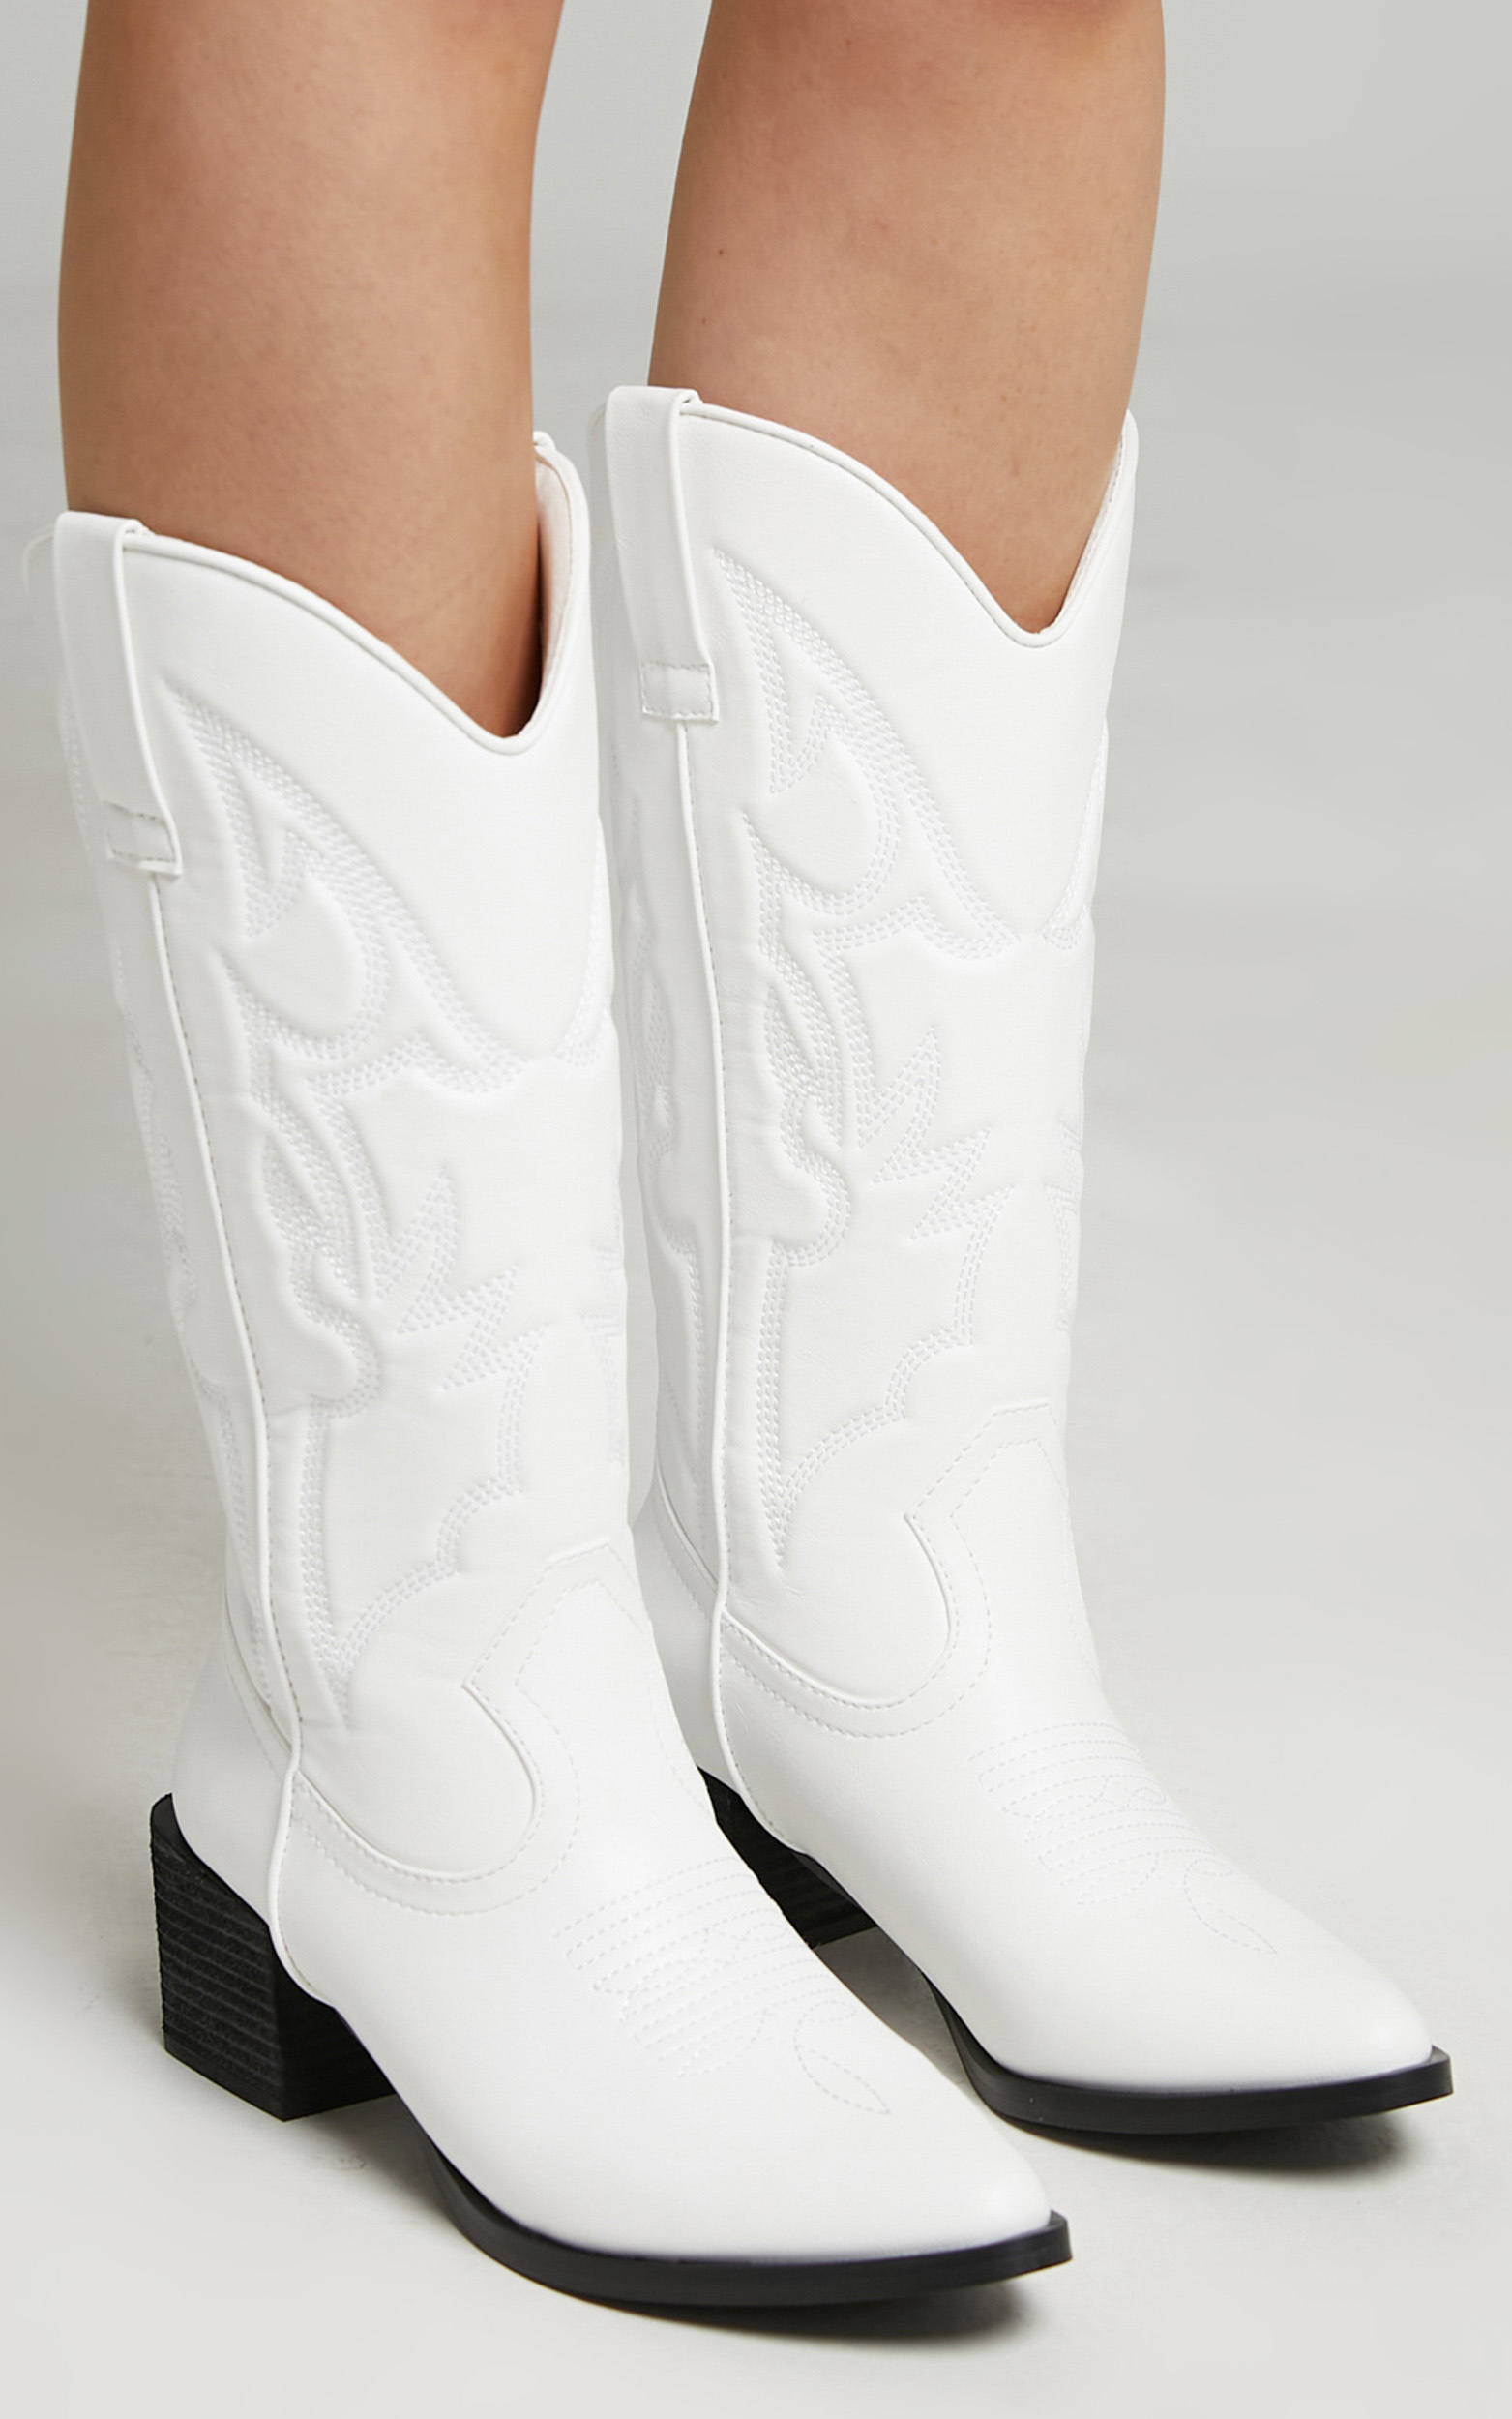 Therapy - Ranger Boots in White - 07, WHT1, hi-res image number null